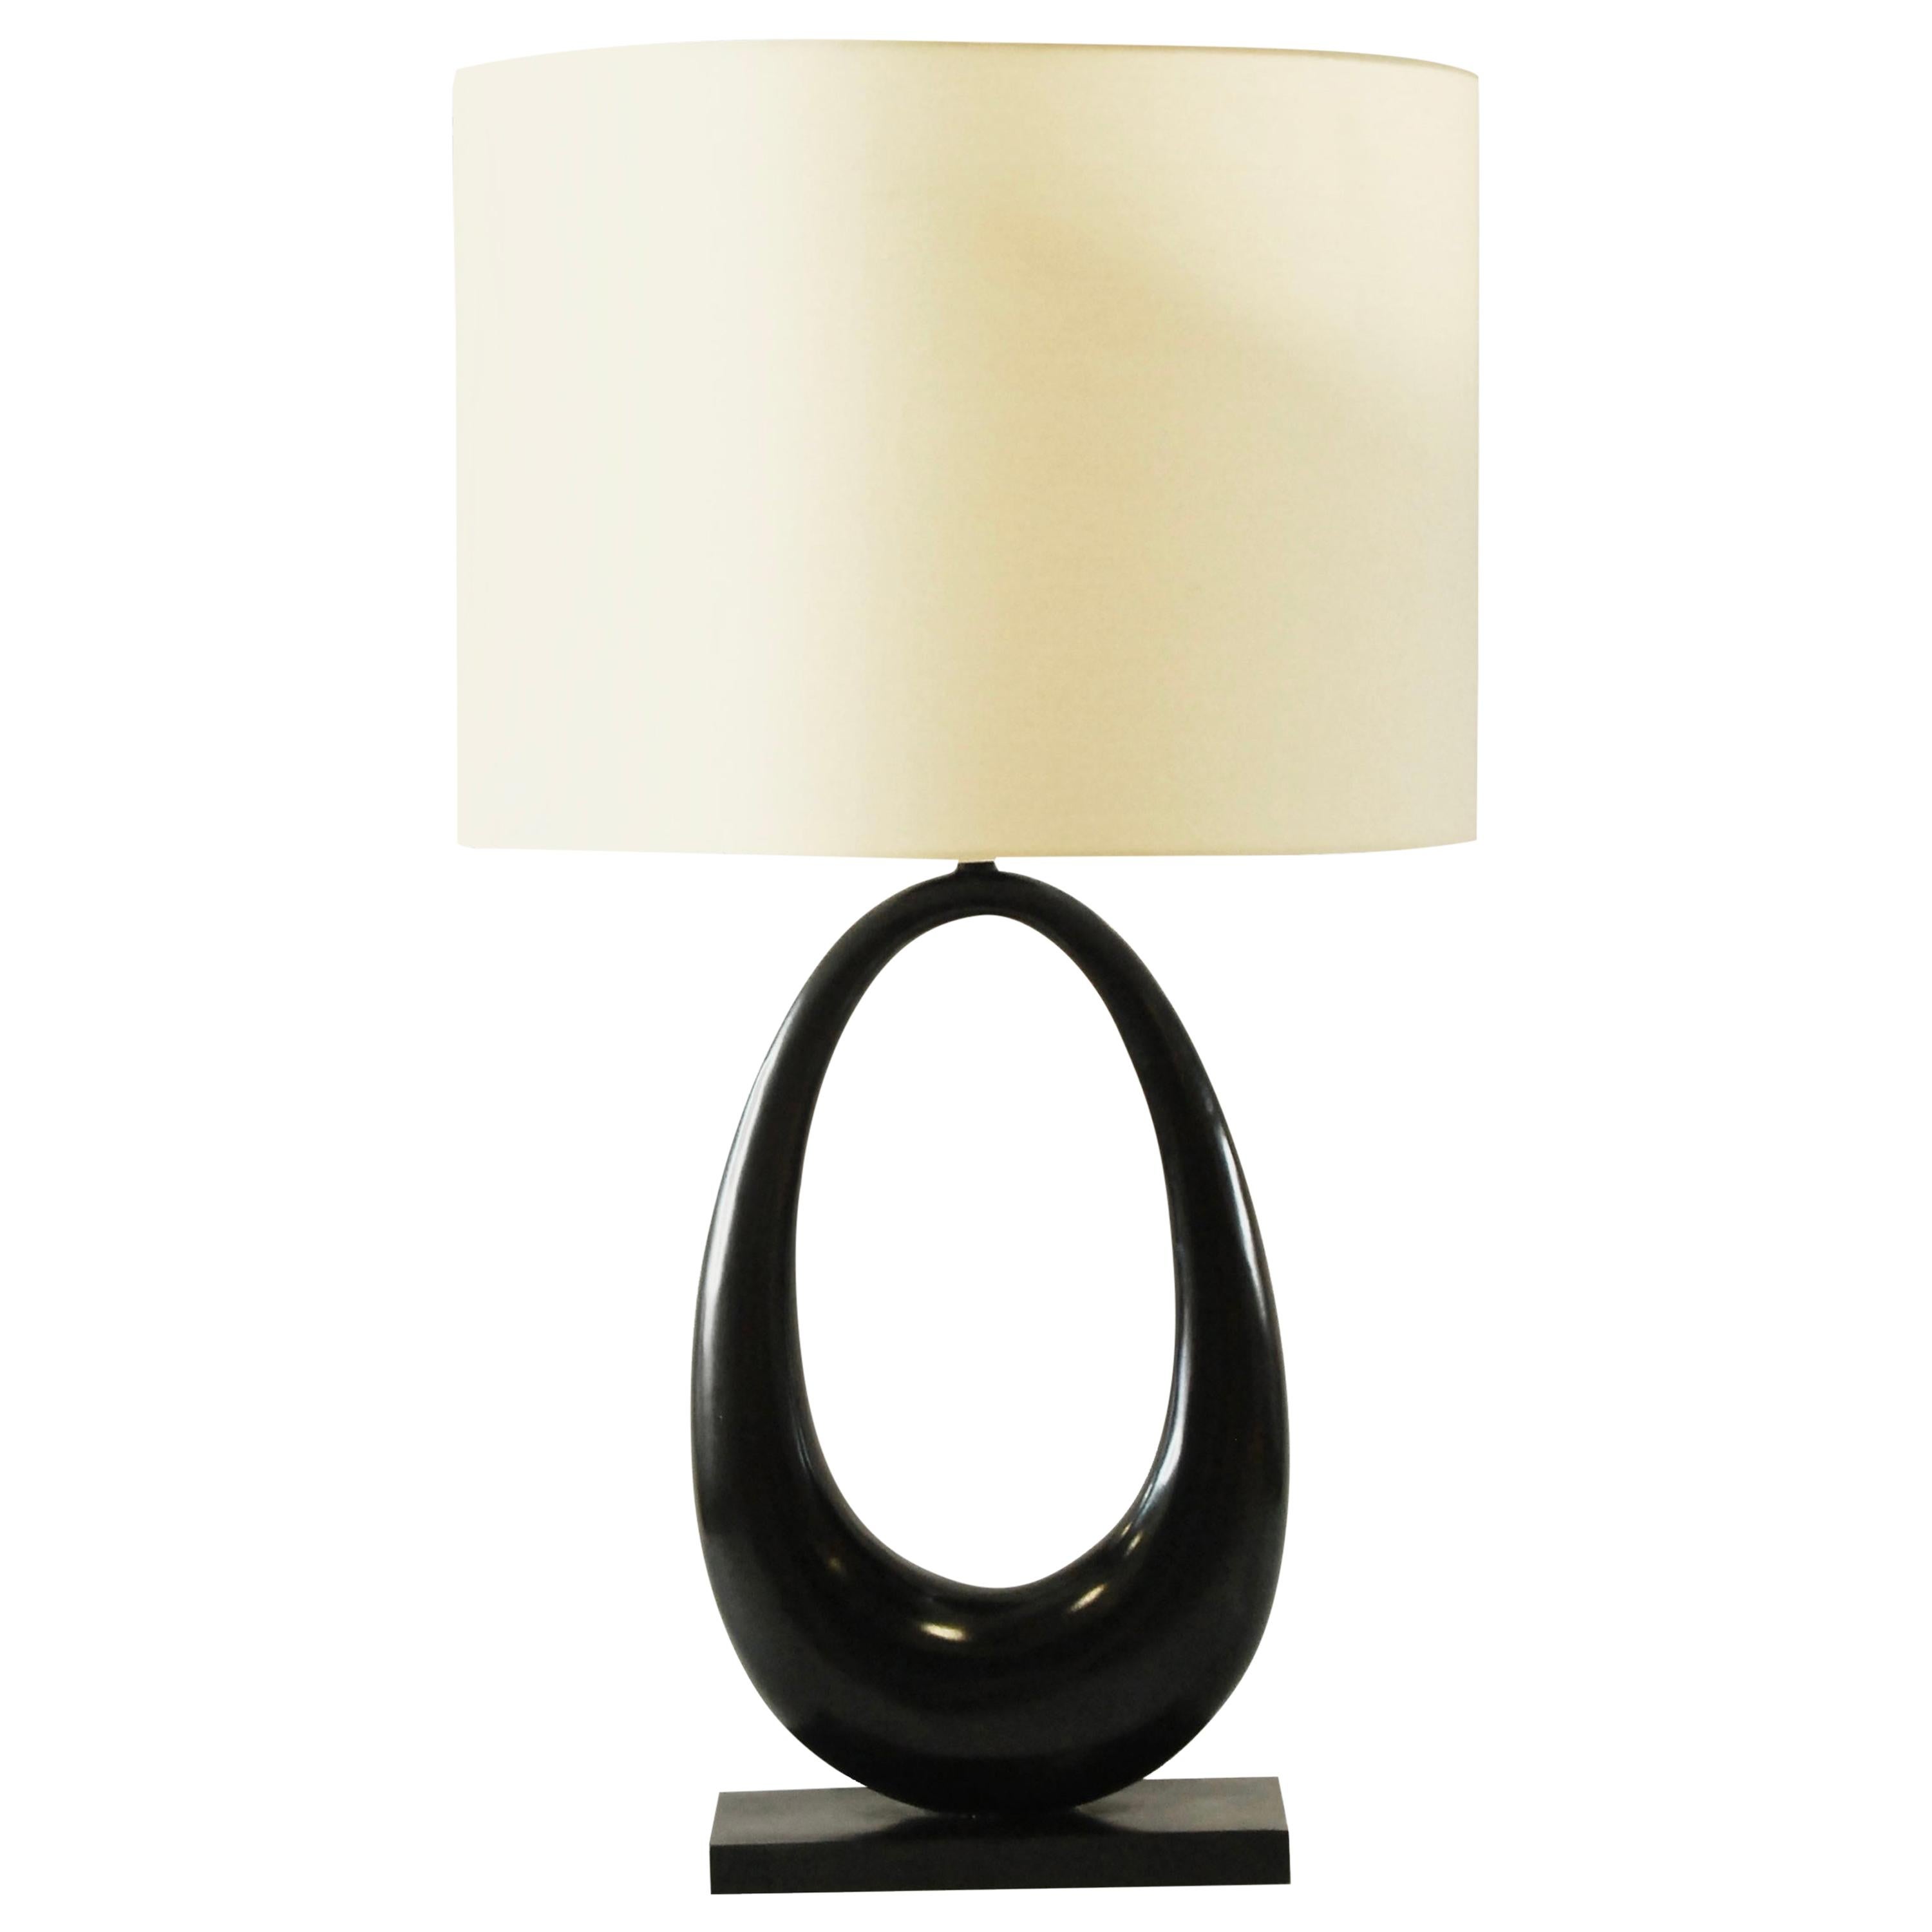 Large Sculptural Jewel Table Lamp in Black Bronze by Elan Atelier (Preorder) For Sale